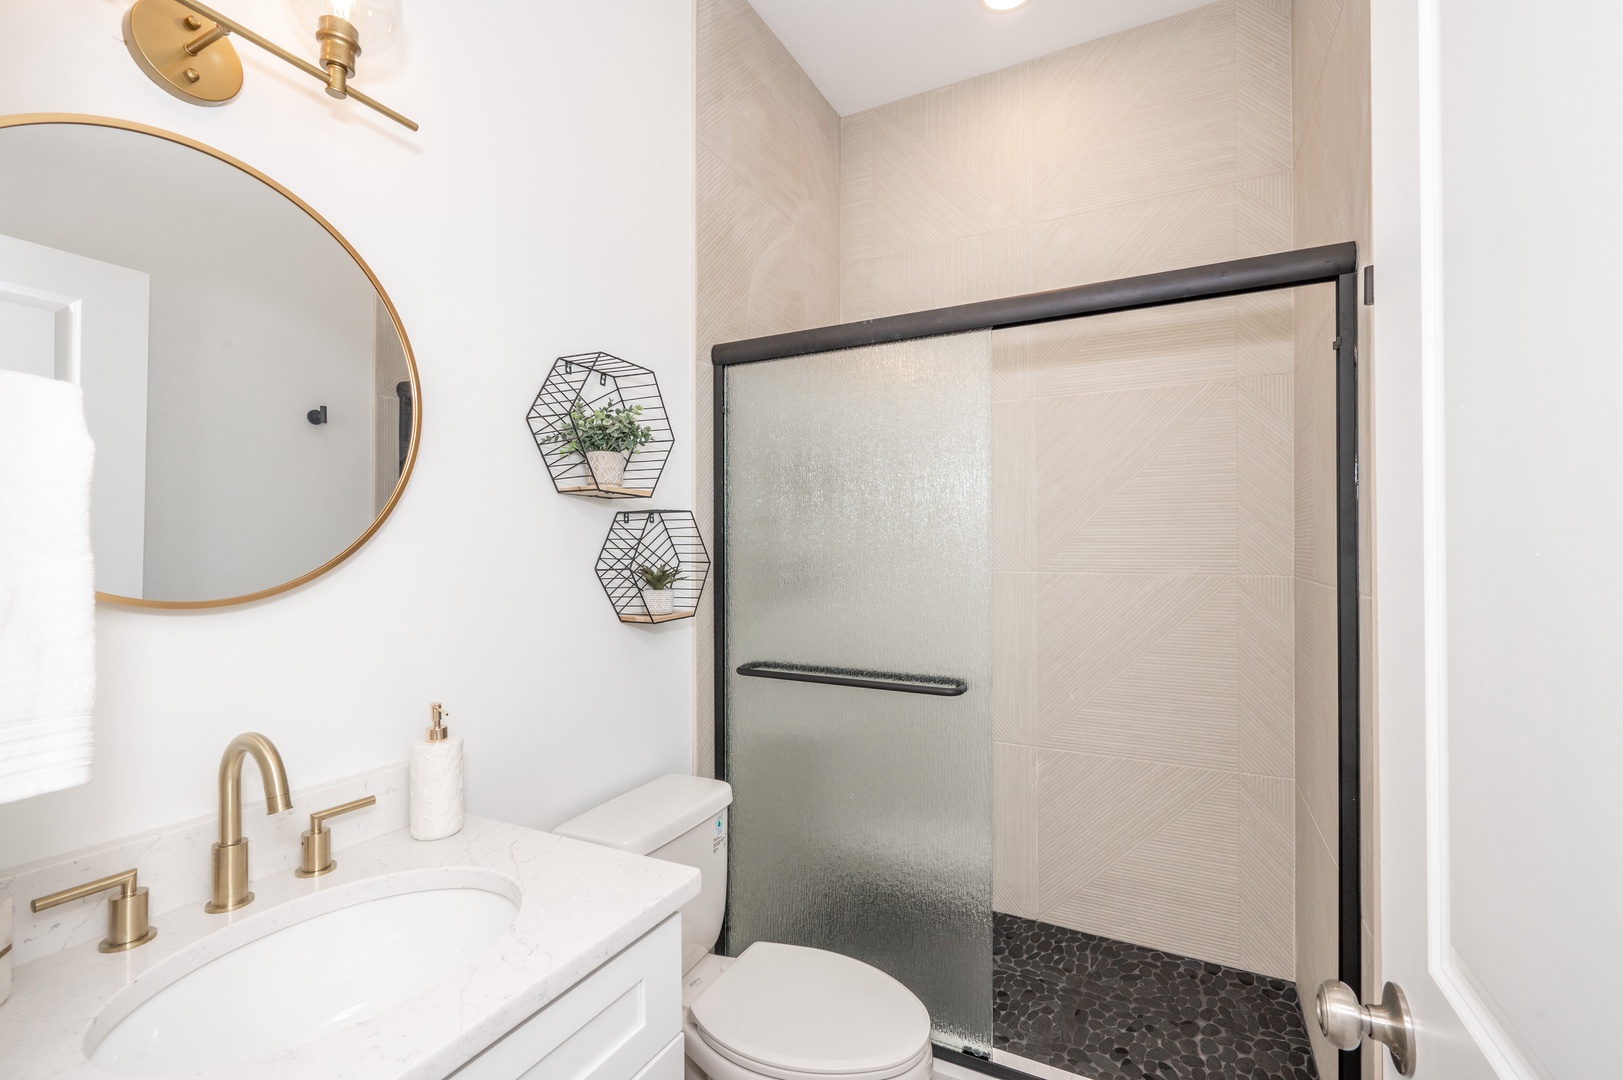 Unit 202: The bathroom offers a chic single vanity and luxurious glass shower